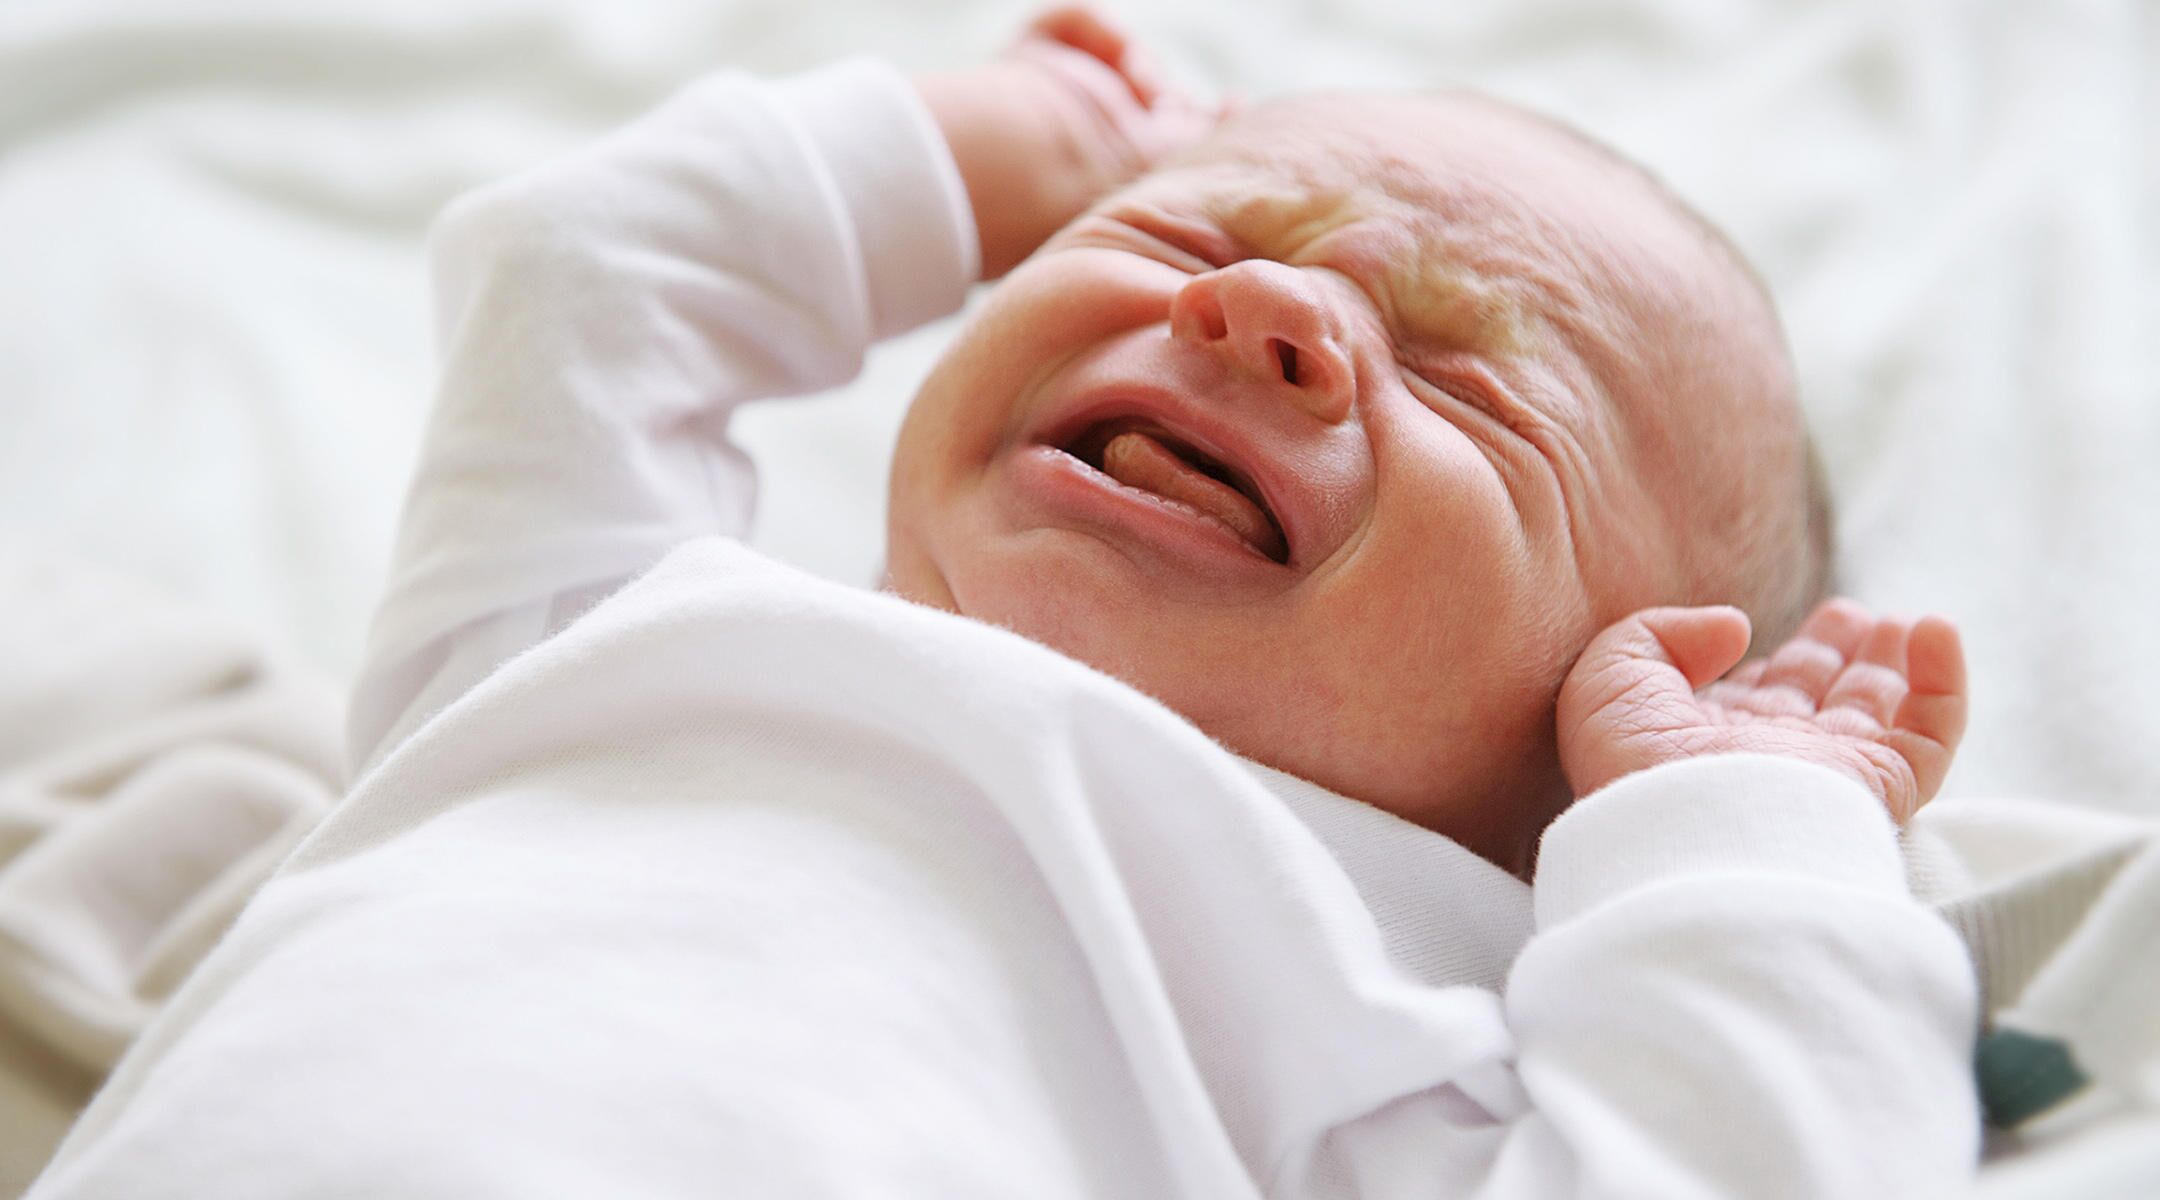 Why Do Babies Cry: The Nine Different Sounds and What They Mean